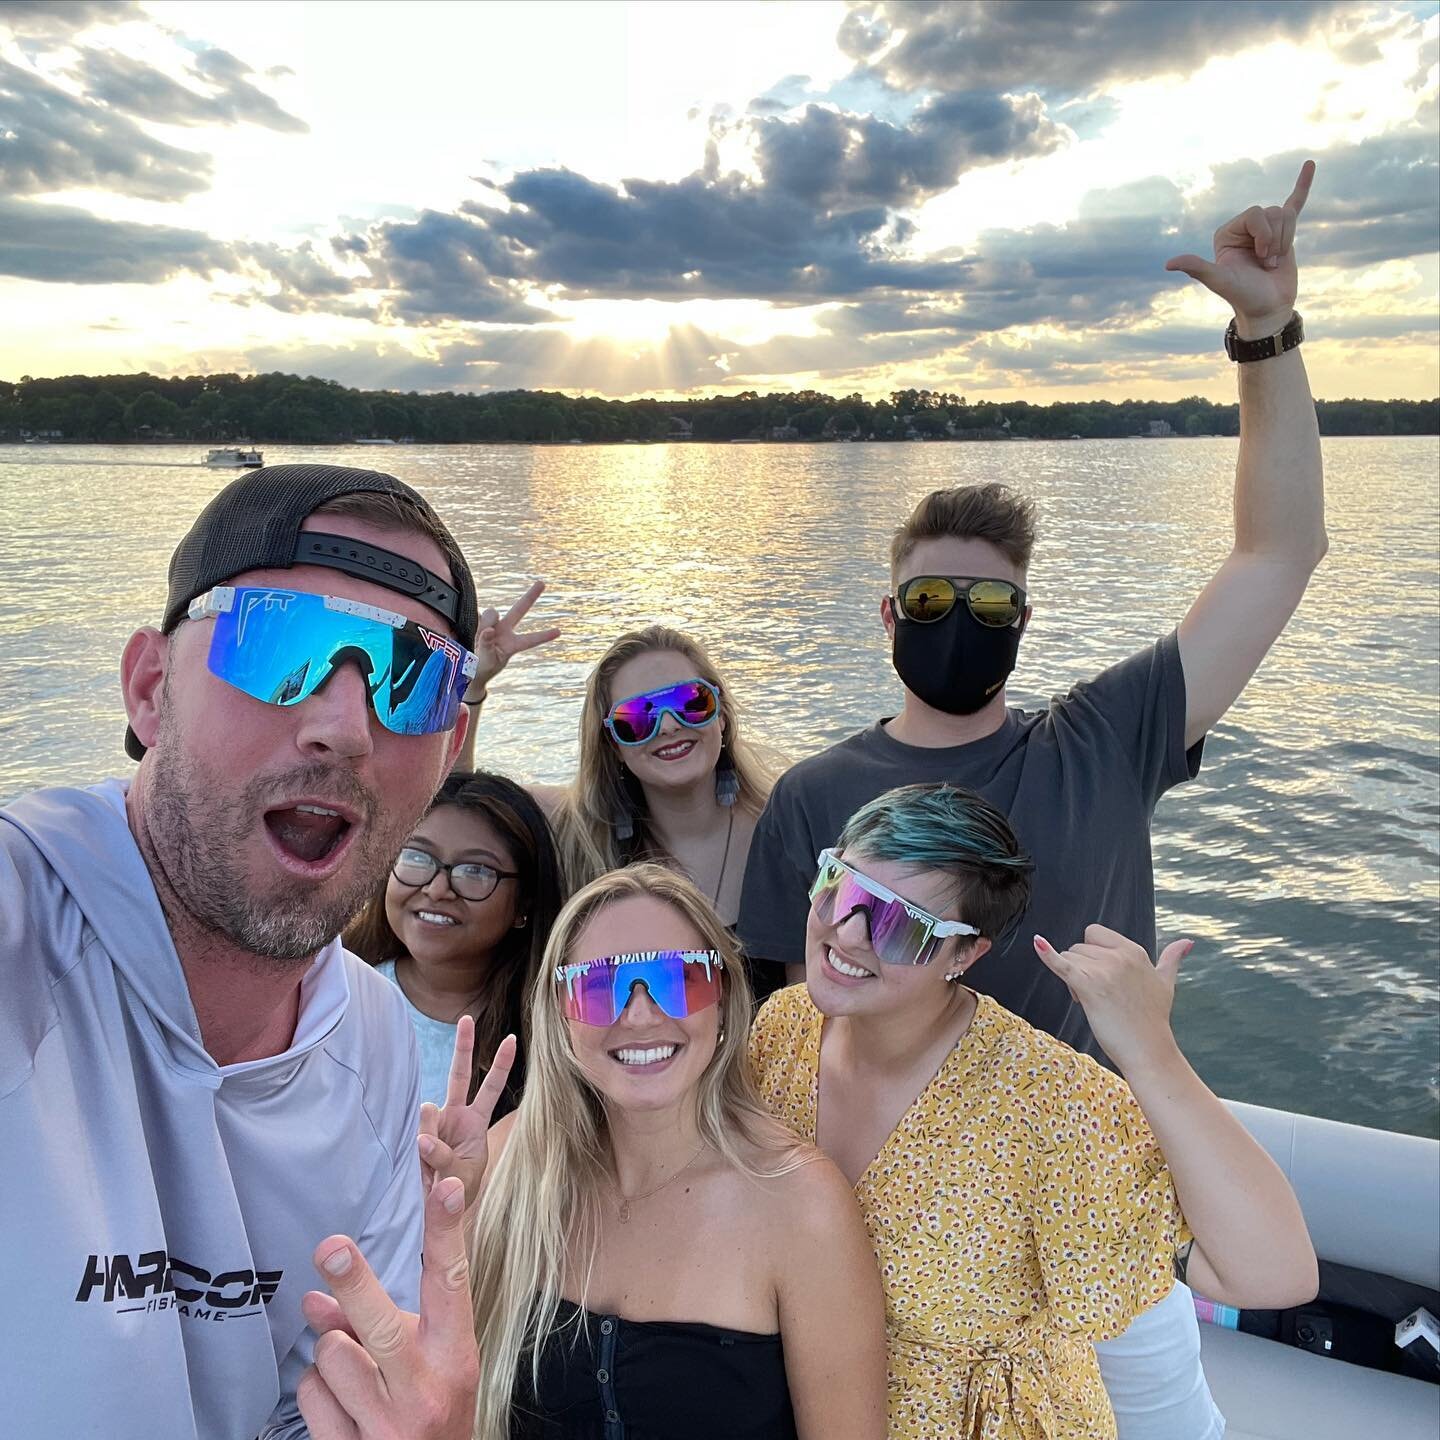 I&rsquo;m blessed to have the best content video team in Charlotte real estate! We kicked off our team boat ride with some new shades from @pit_viper 
Excited to be heading to Heading down to Wrightsville Beach this week for our annual team retreat! 